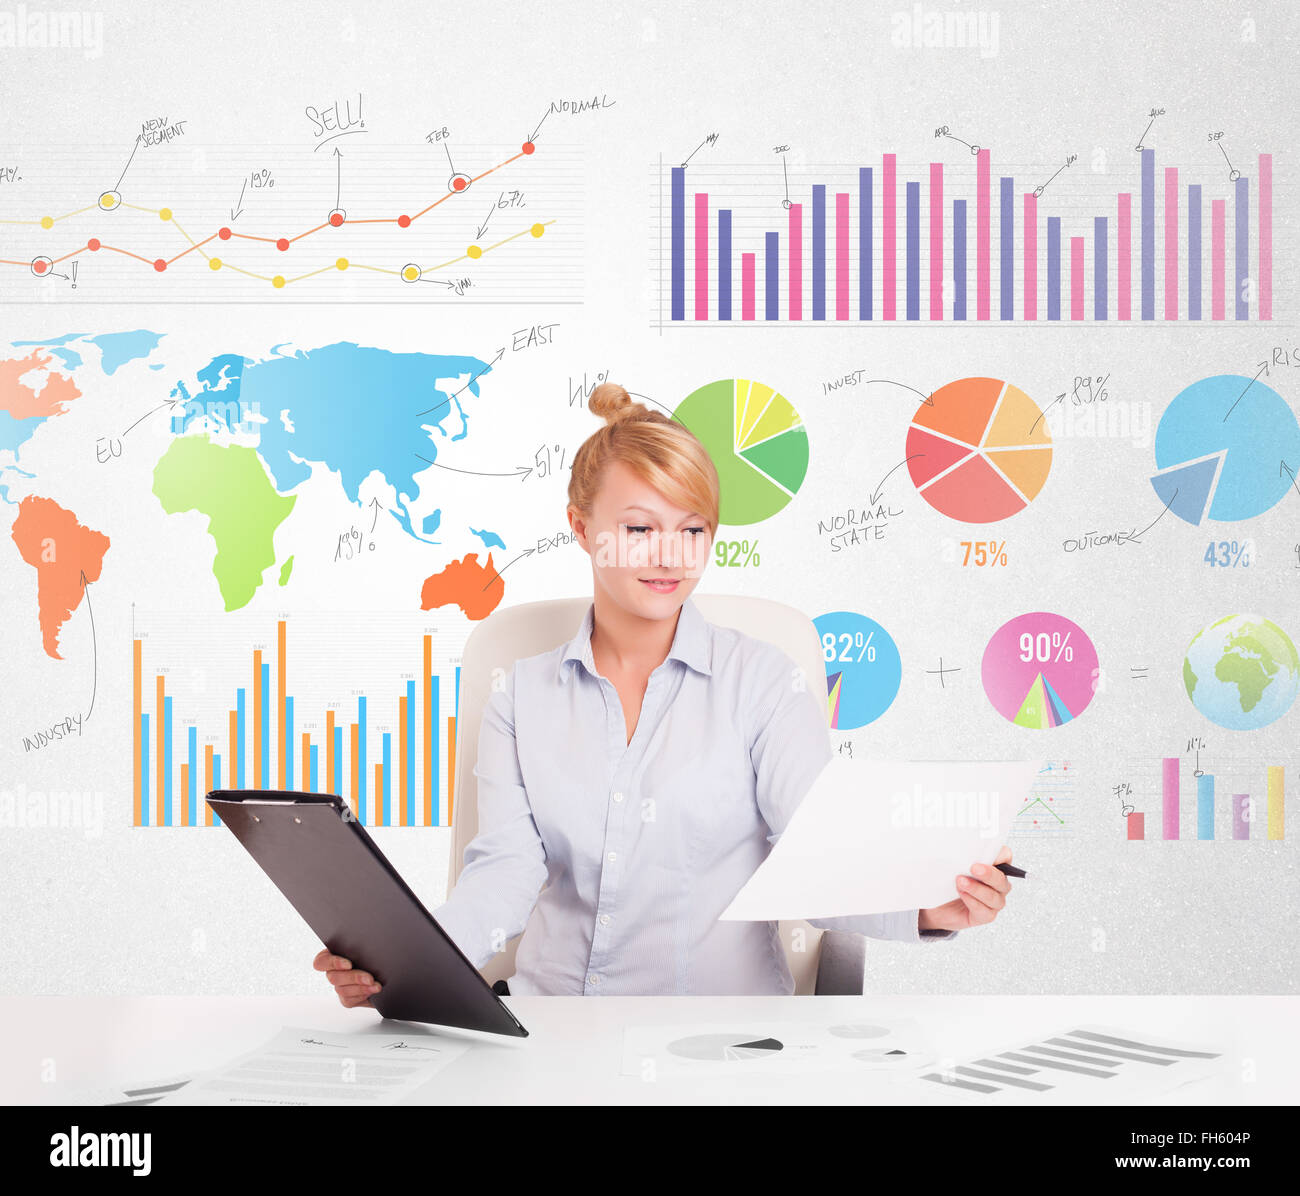 Business woman with colorful charts Stock Photo